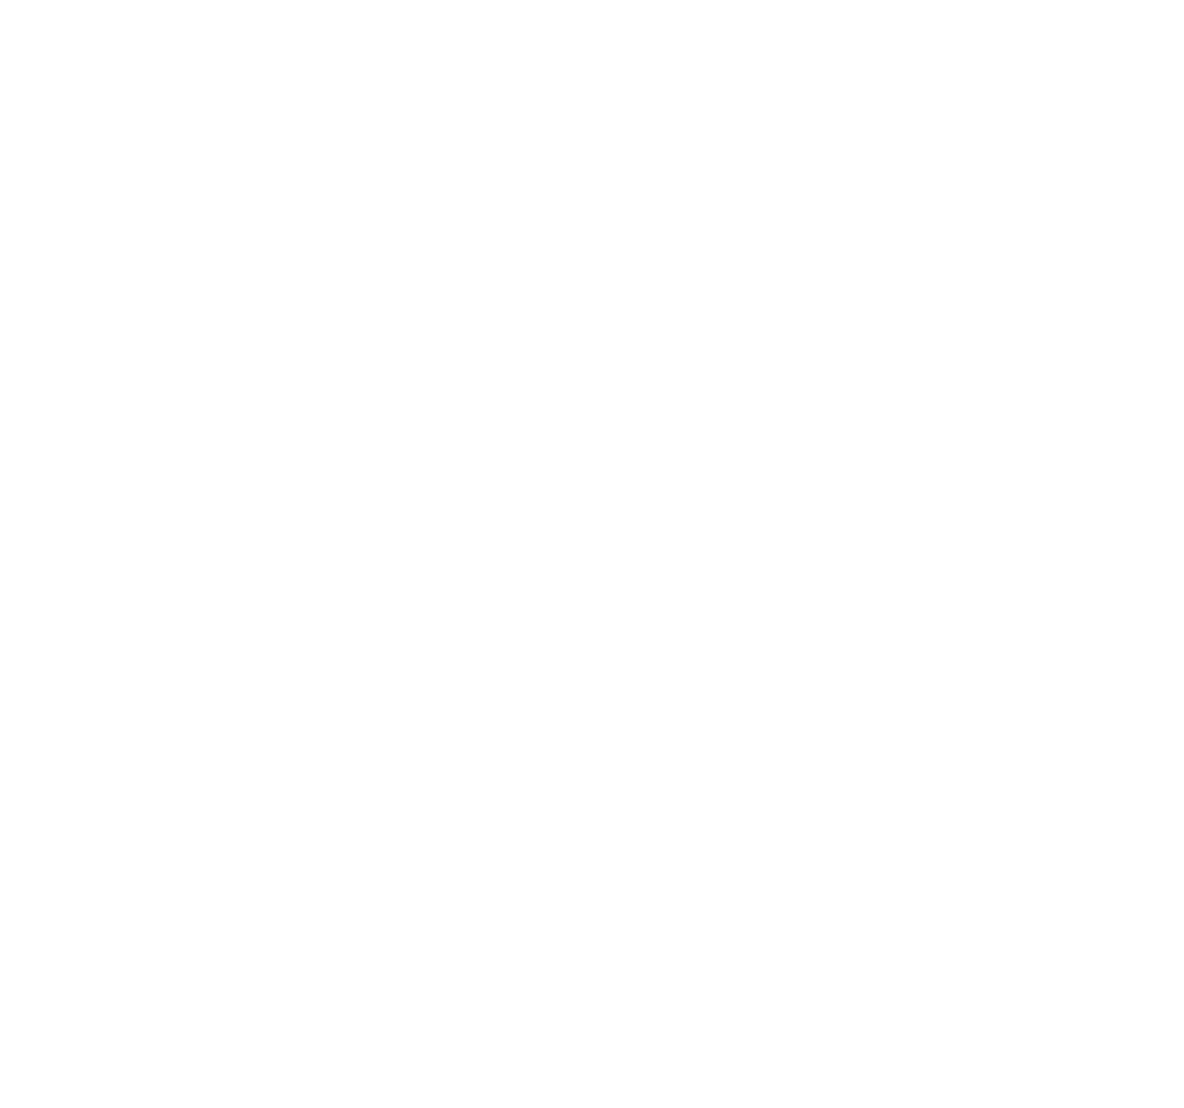 The Aylmer District Trapper's Council